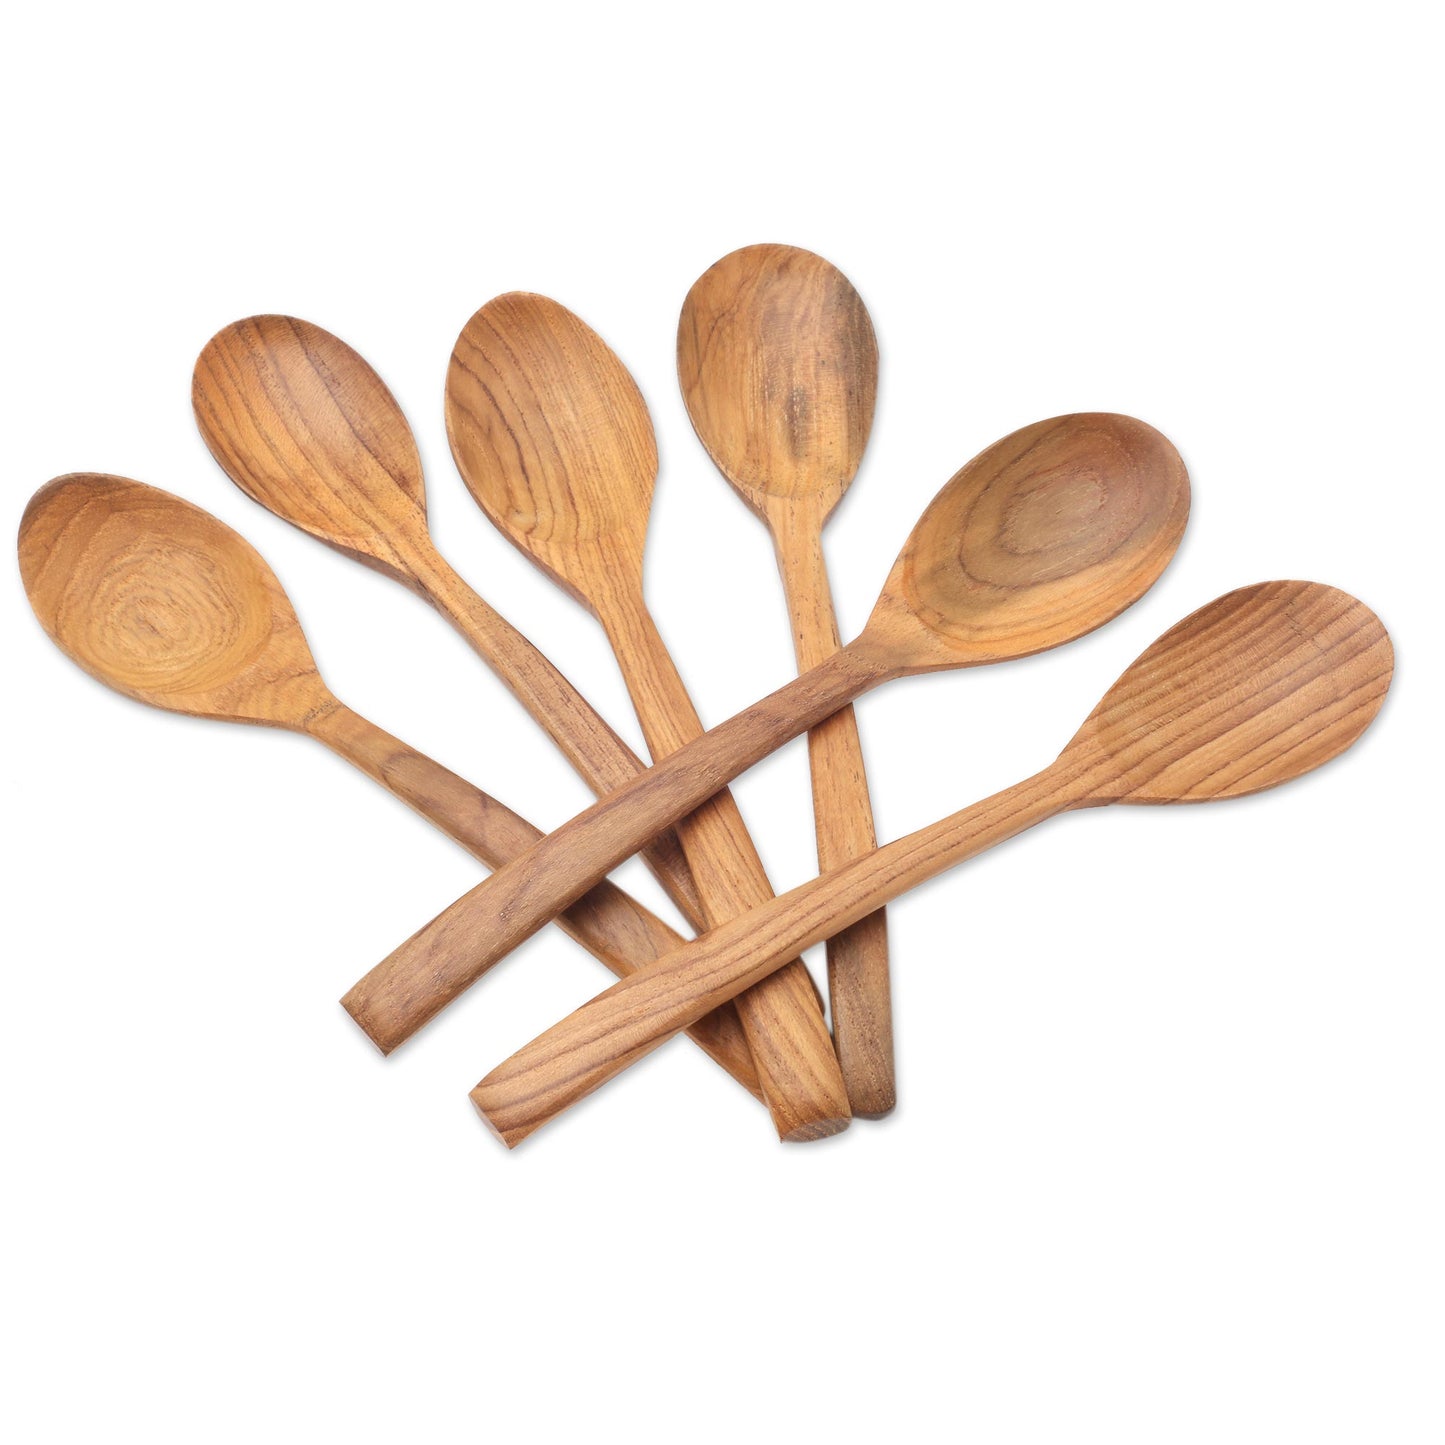 Warm Memory Handcrafted Teak Wood Spoons from Bali (Set of 6)